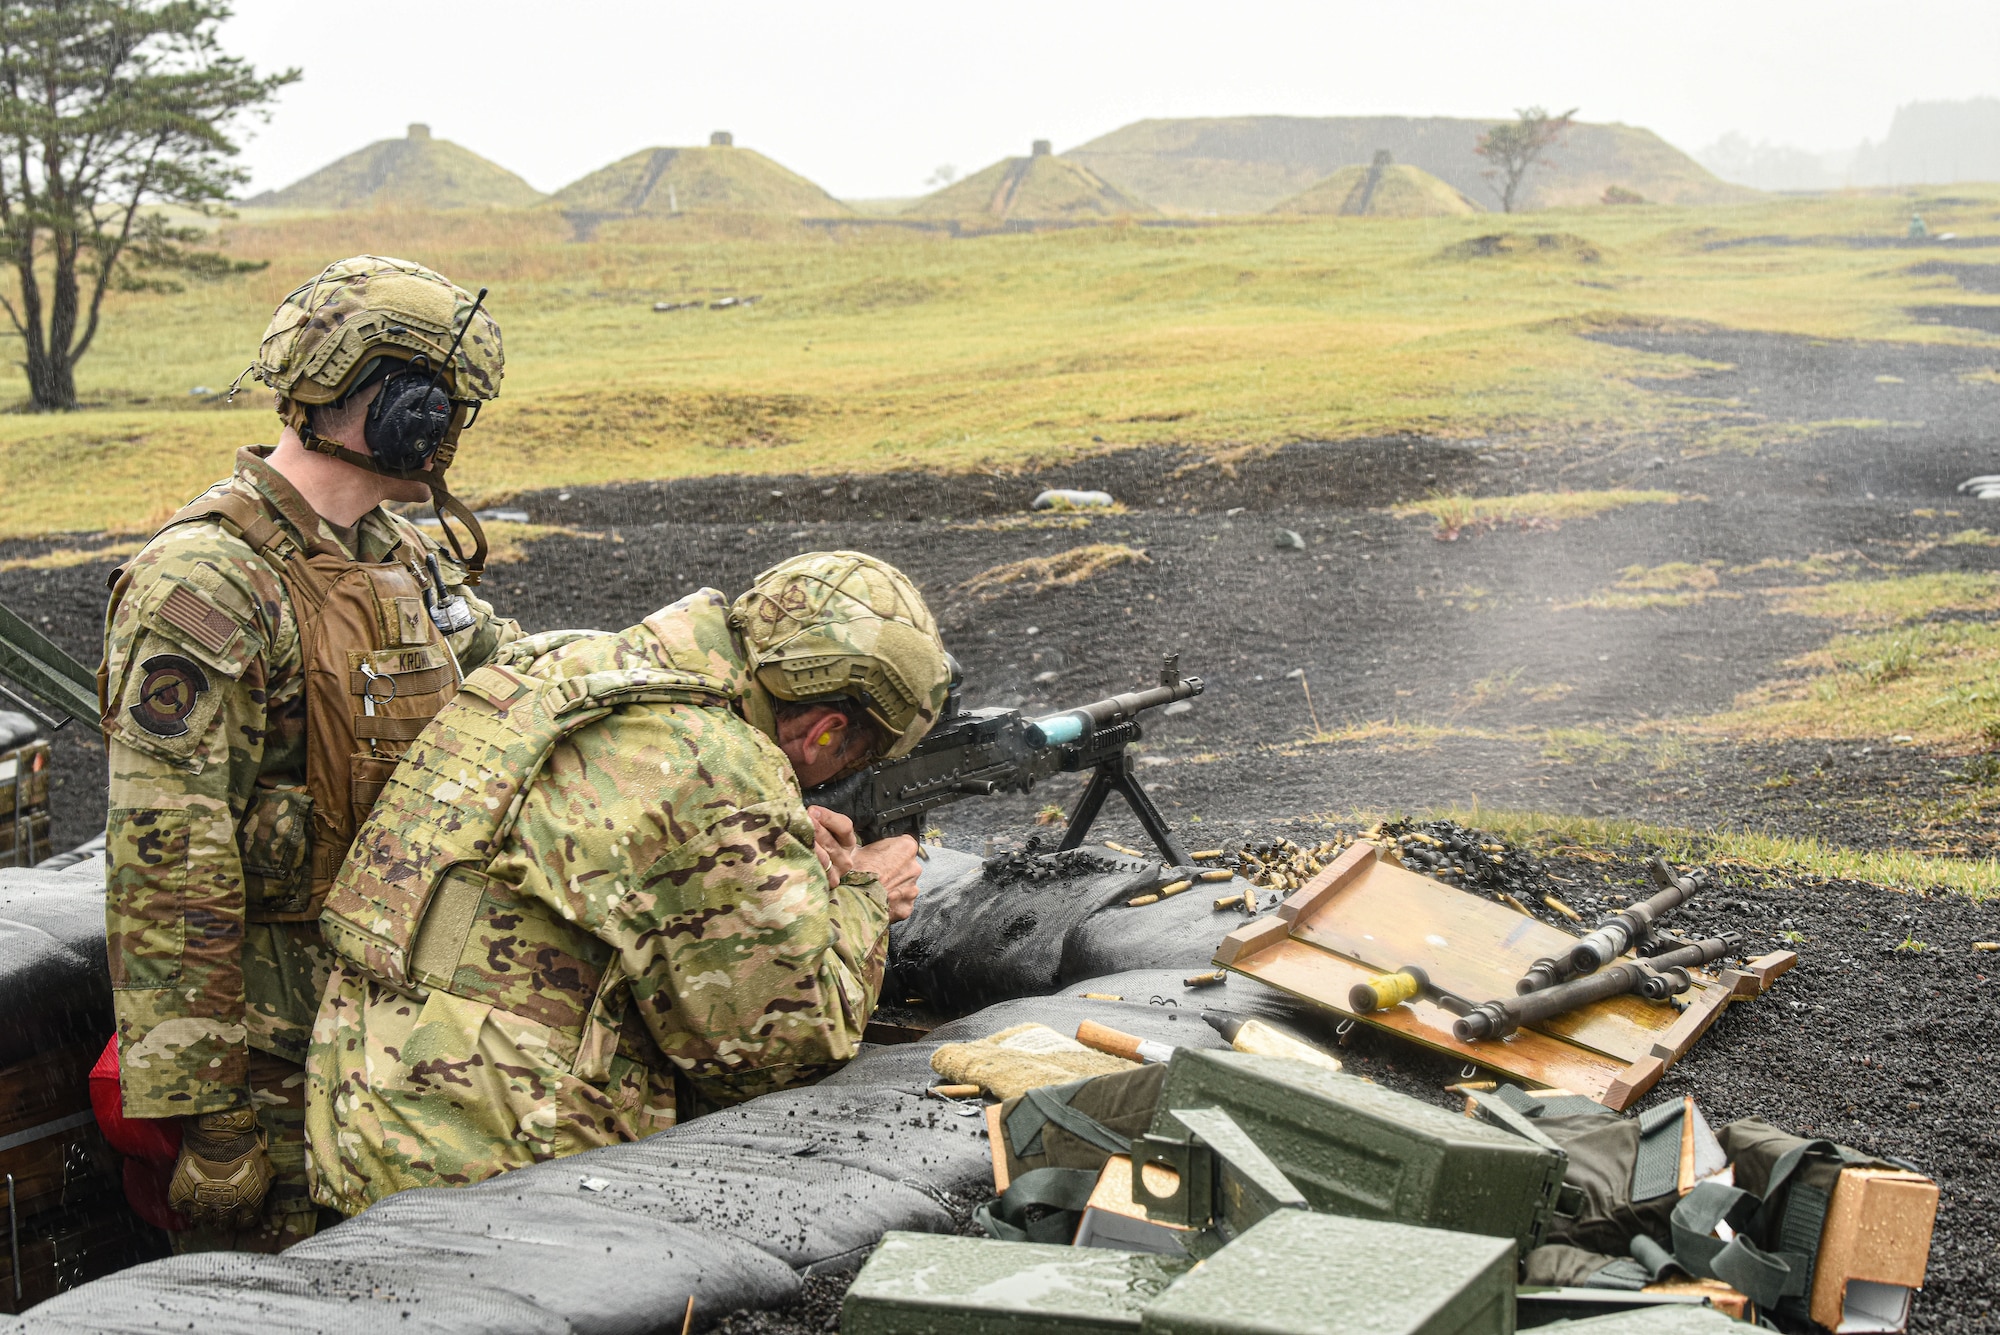 U.S. military personnel fire a machine gun on a weapons range.